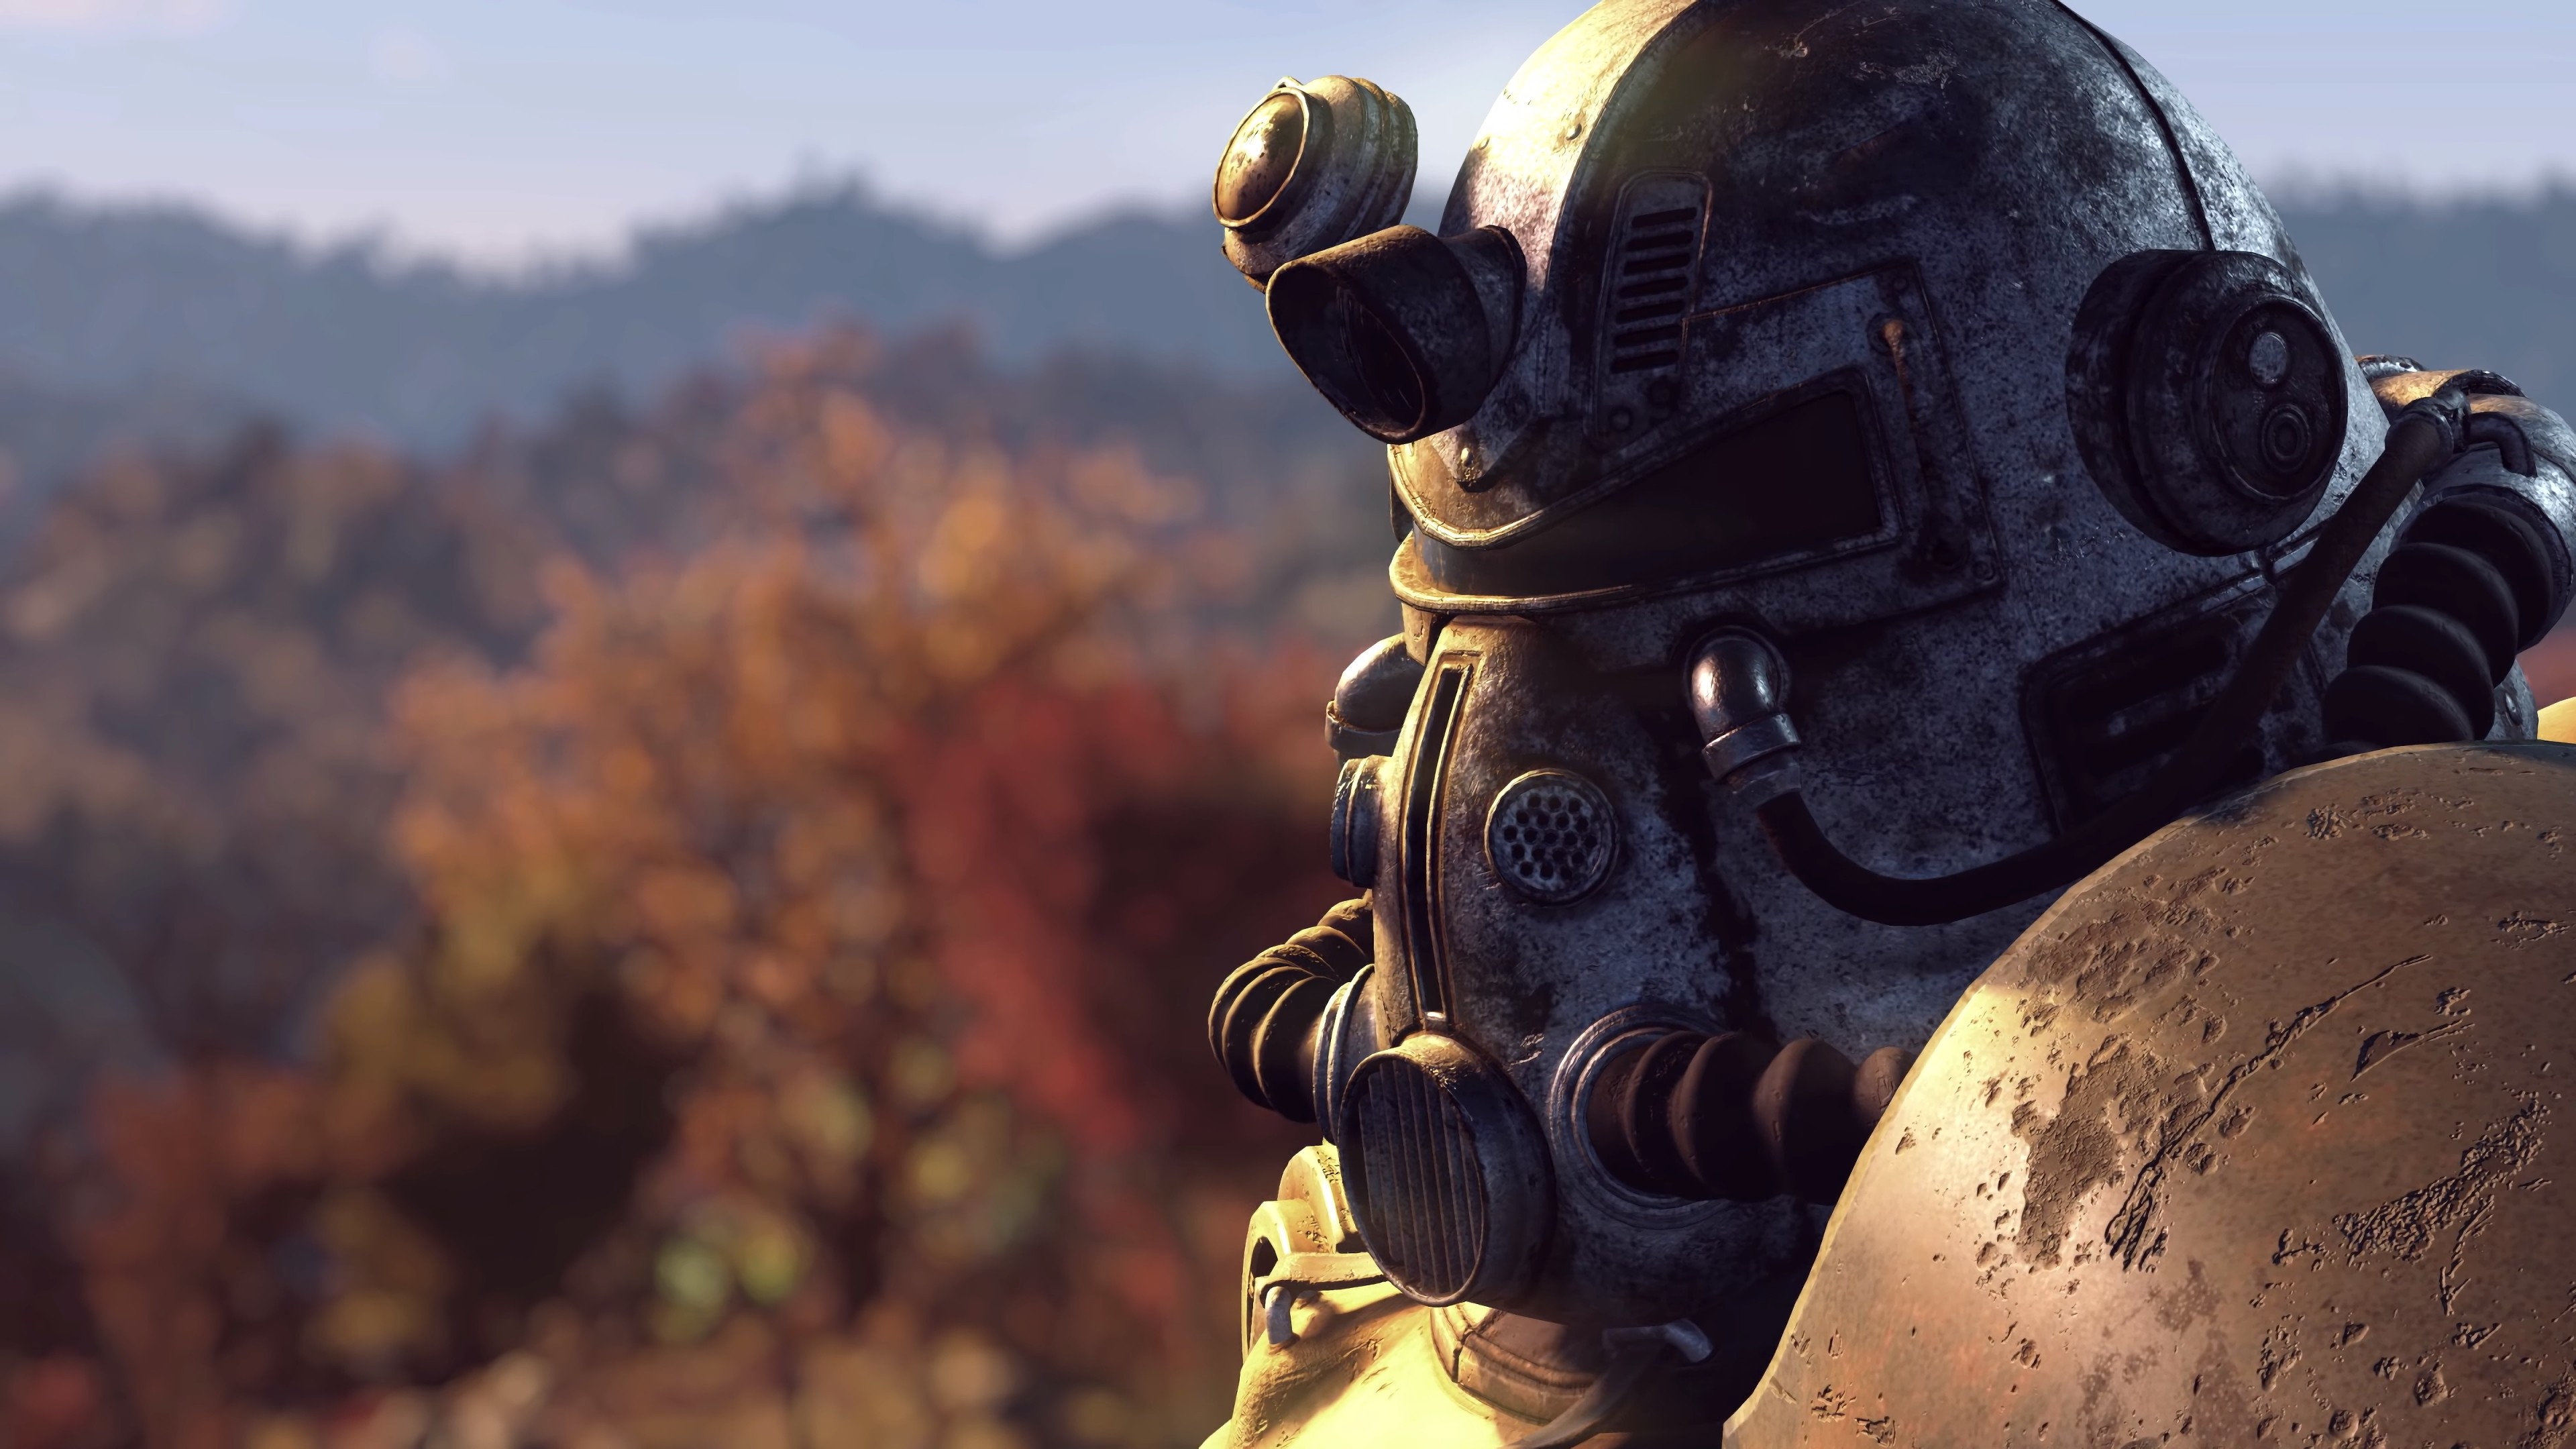 fallout 76, power armor (fallout), video game, fallout